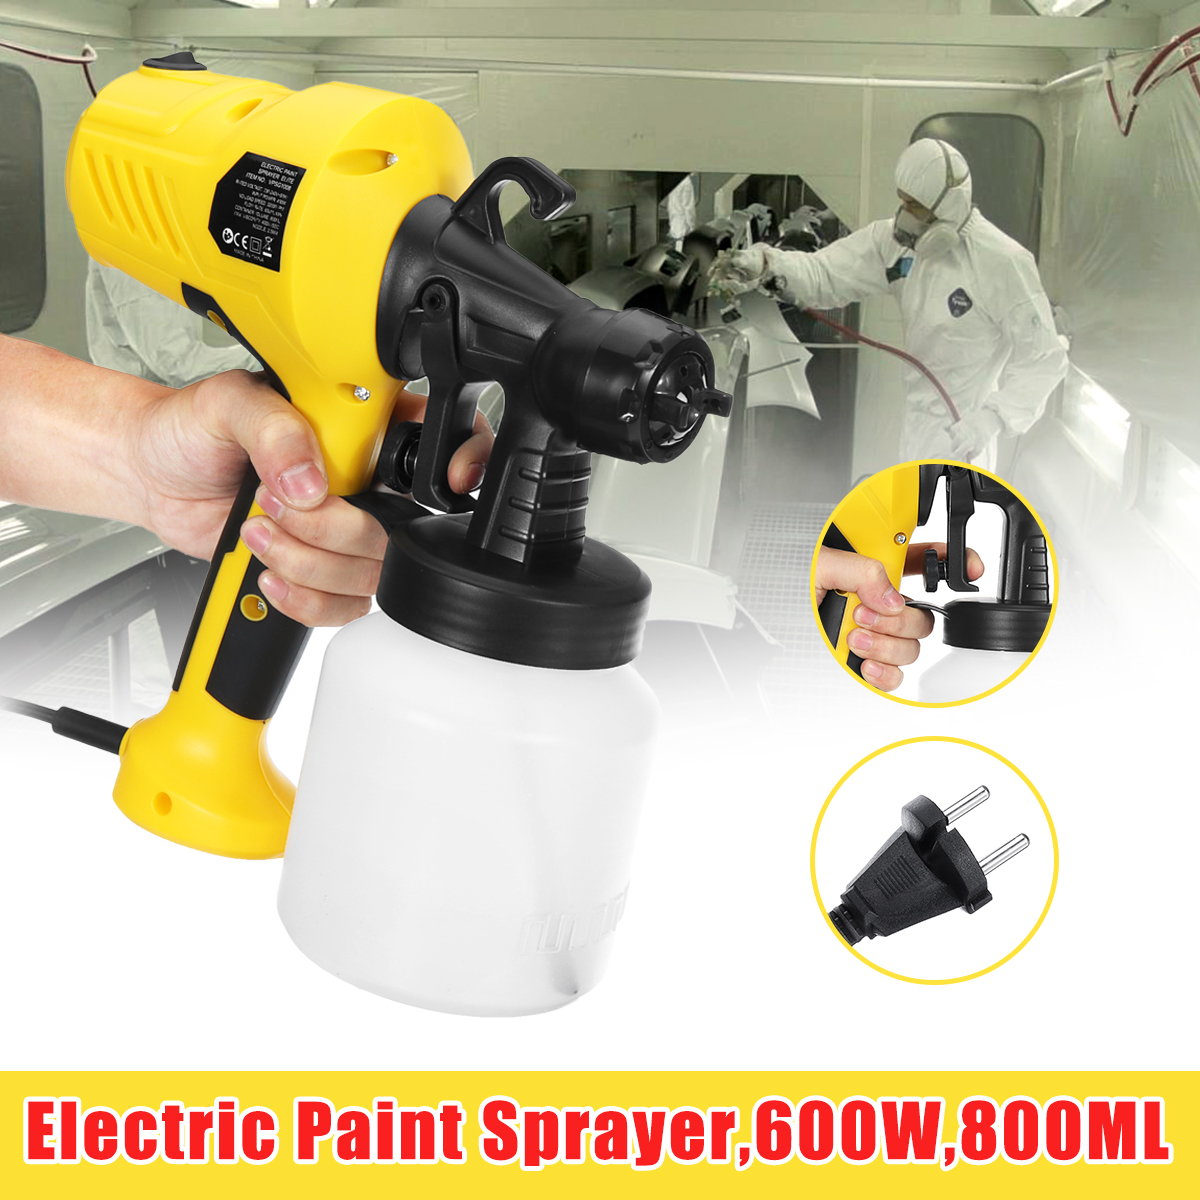 600W Electric Spray Paint Sprayer For Cars Wood Furniture Wall Woodworking 25